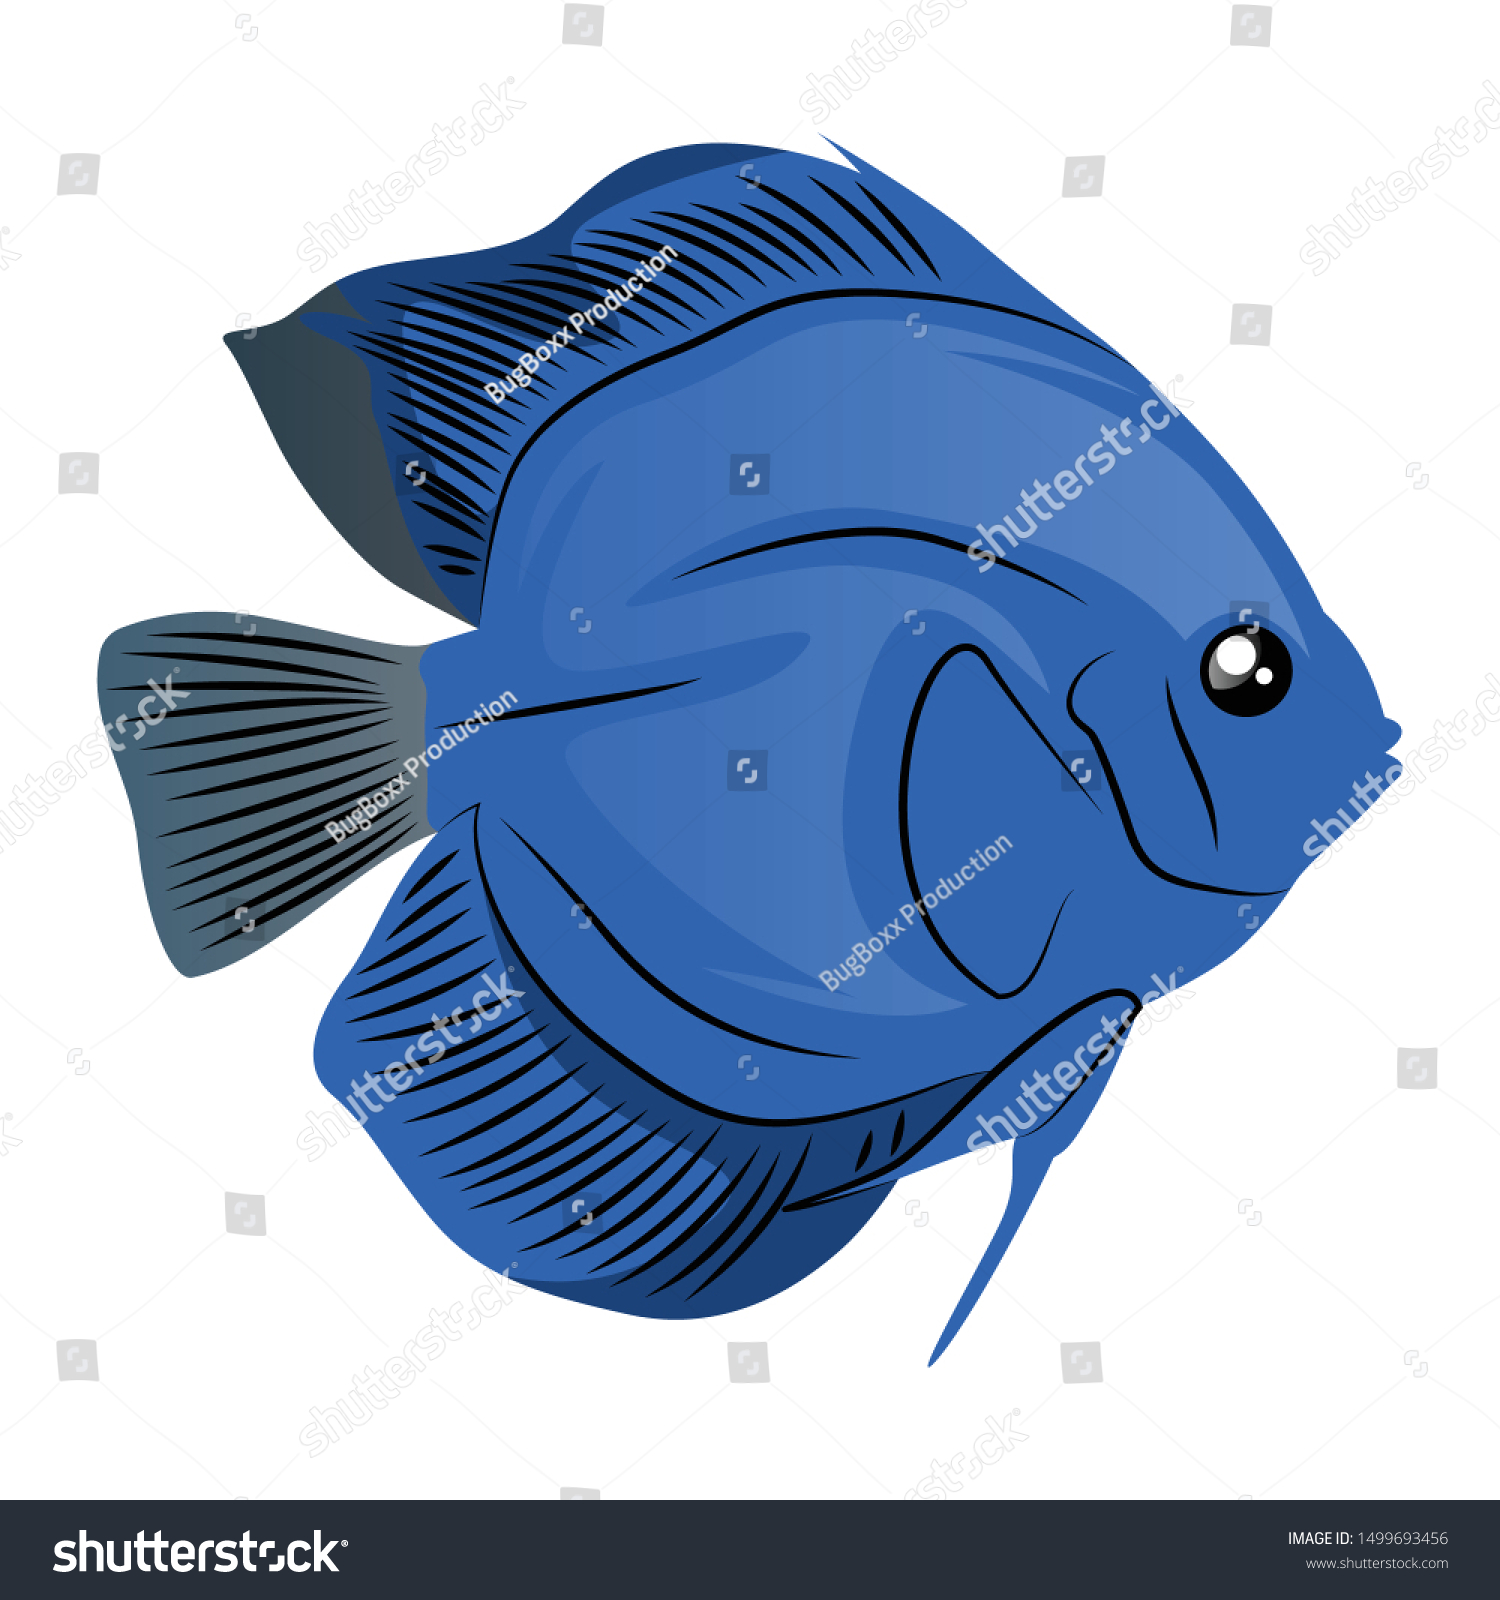 Discus Fish Vector Illustration Isolated On Stock Vector (Royalty Free ...